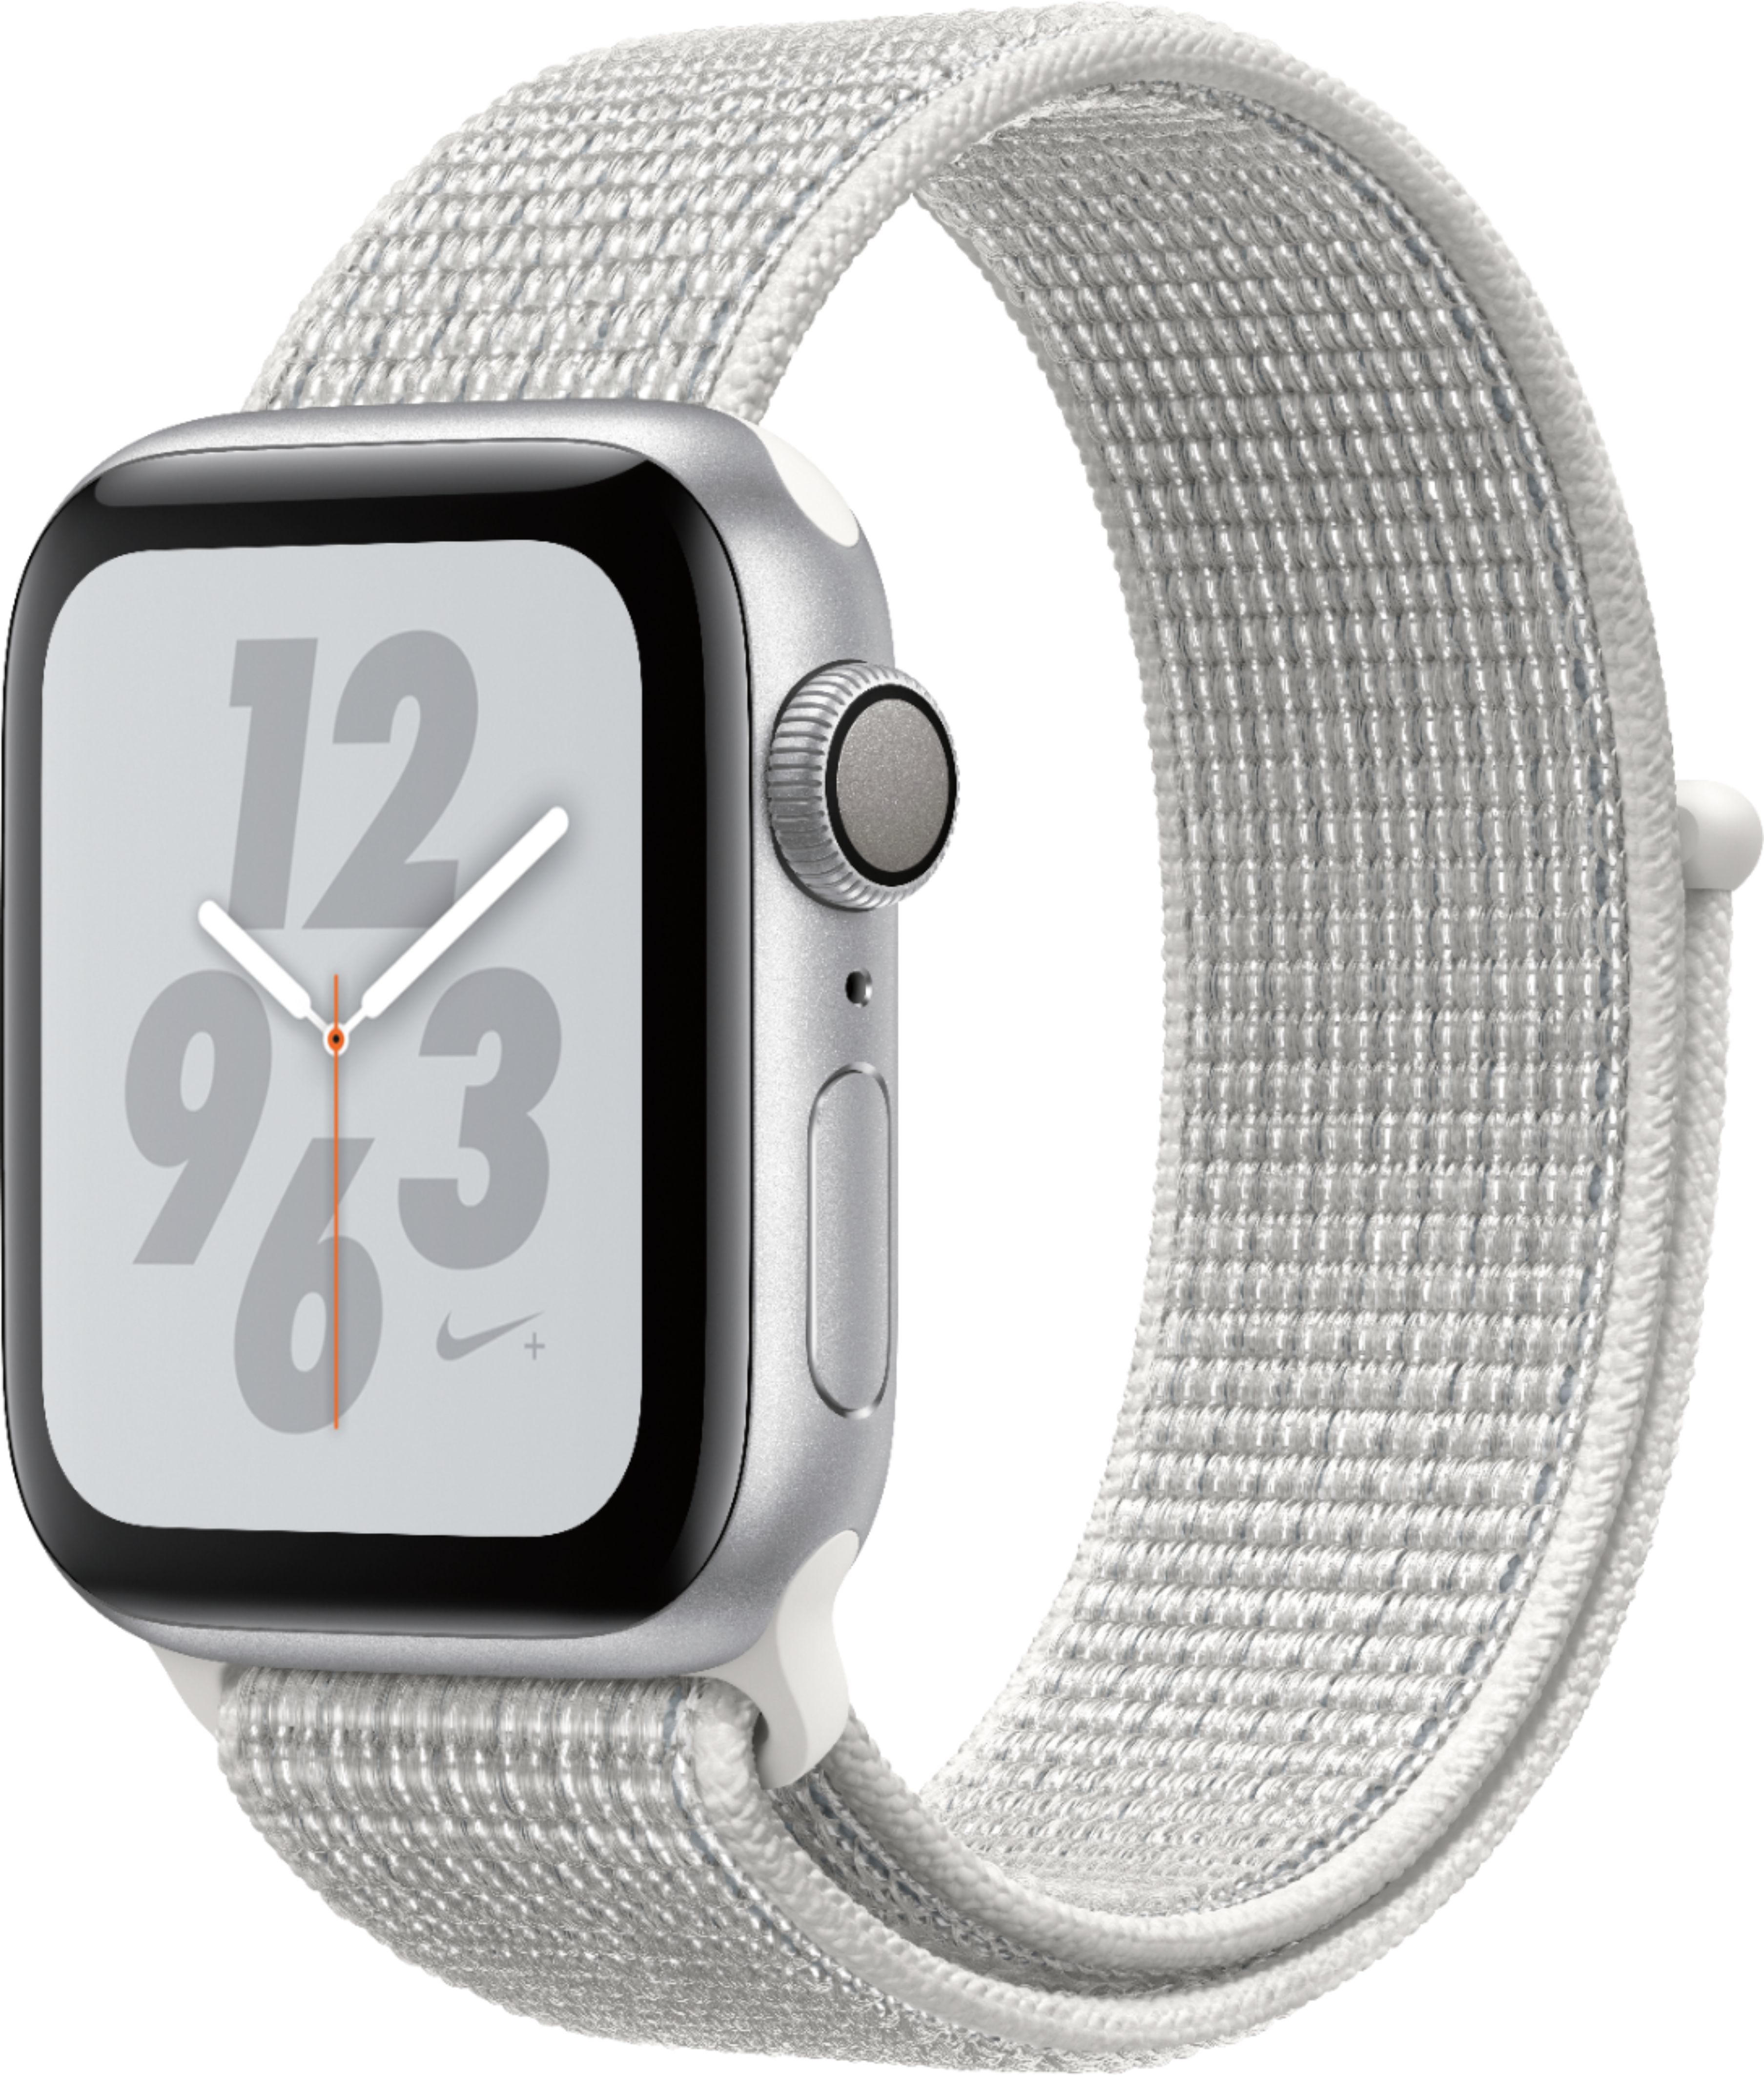 Apple Watch Nike+ Series 4 (GPS) 40mm Silver Aluminum Case with Summit White Nike Sport Loop - Silver Aluminum was $349.0 now $244.99 (30.0% off)